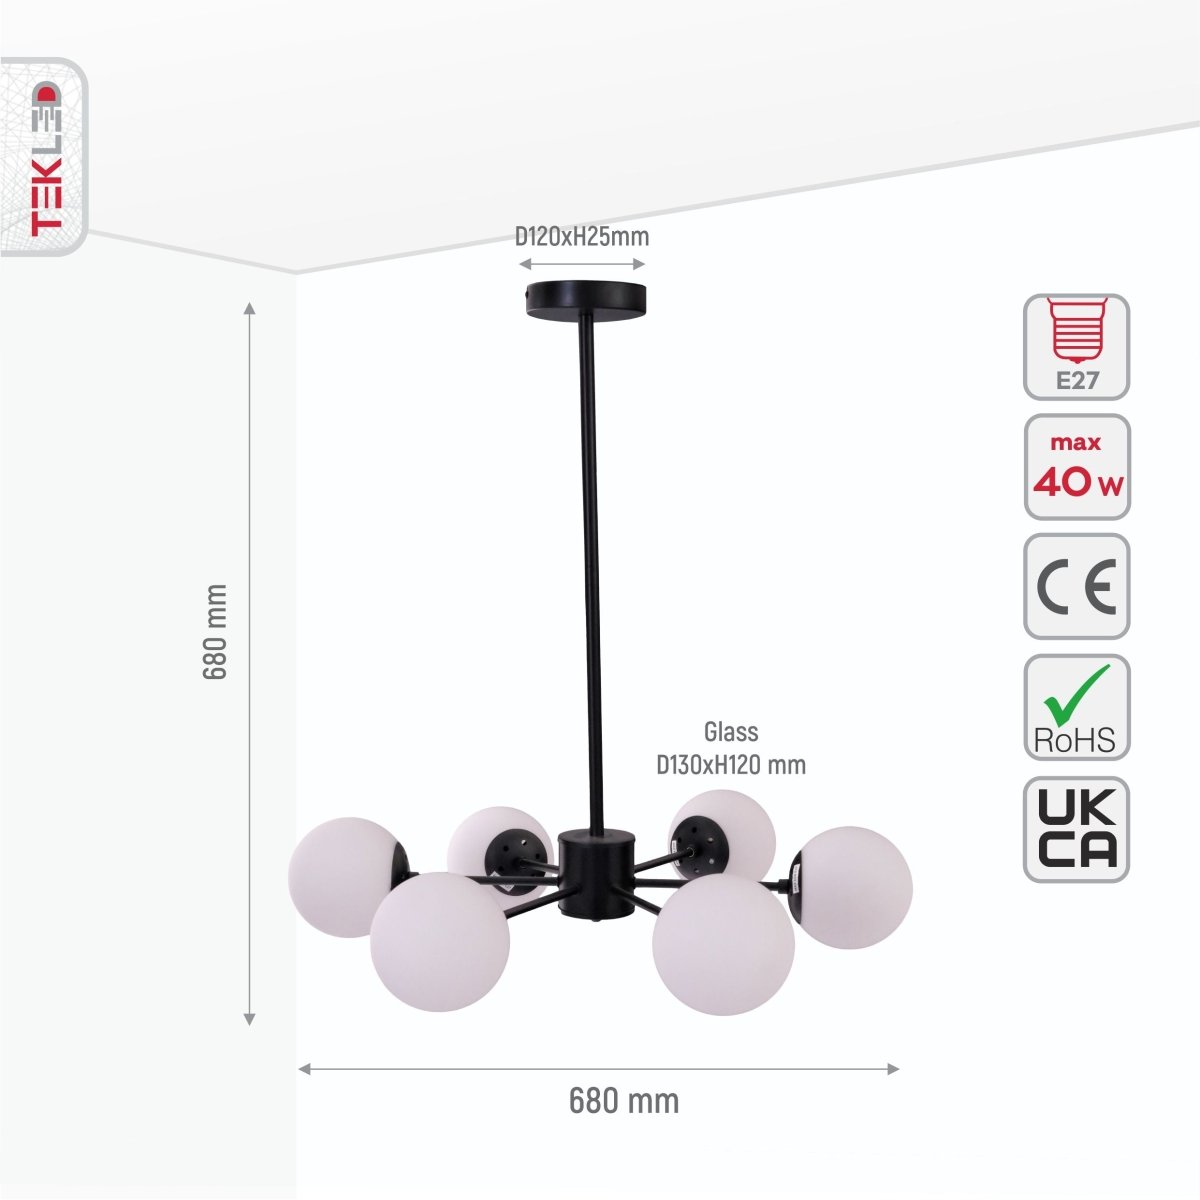 Size and specs of Snowflake Opal Globe Glass Black Body Ceiling Light with 6xE27 Fittings | TEKLED 159-17423